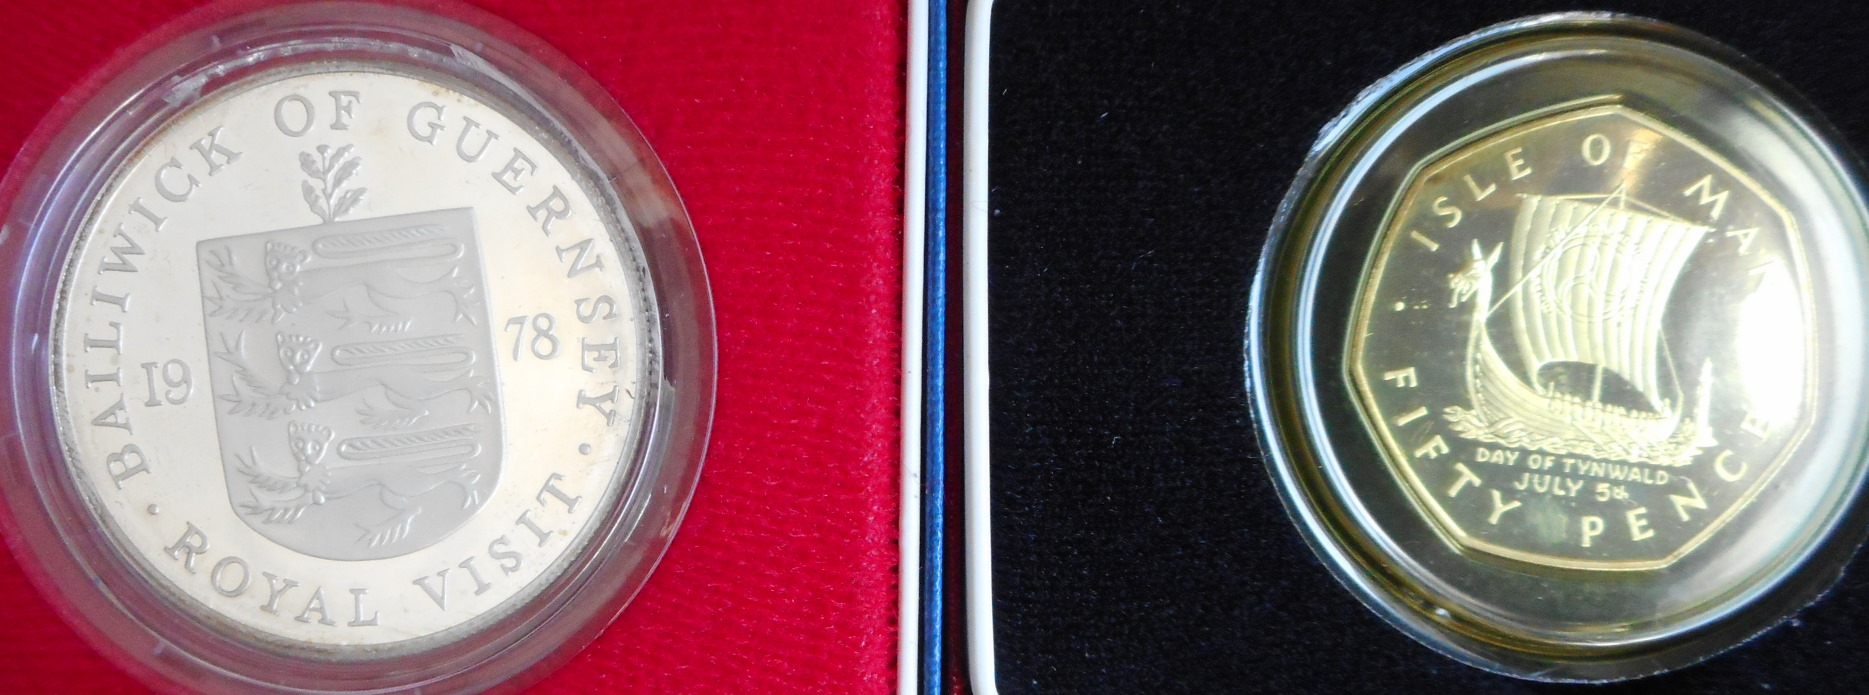 Guernsey. Crown. 1978. Silver Proof. Isle of Man. Fifty pence. 1979. Silver Proof. Both cased.